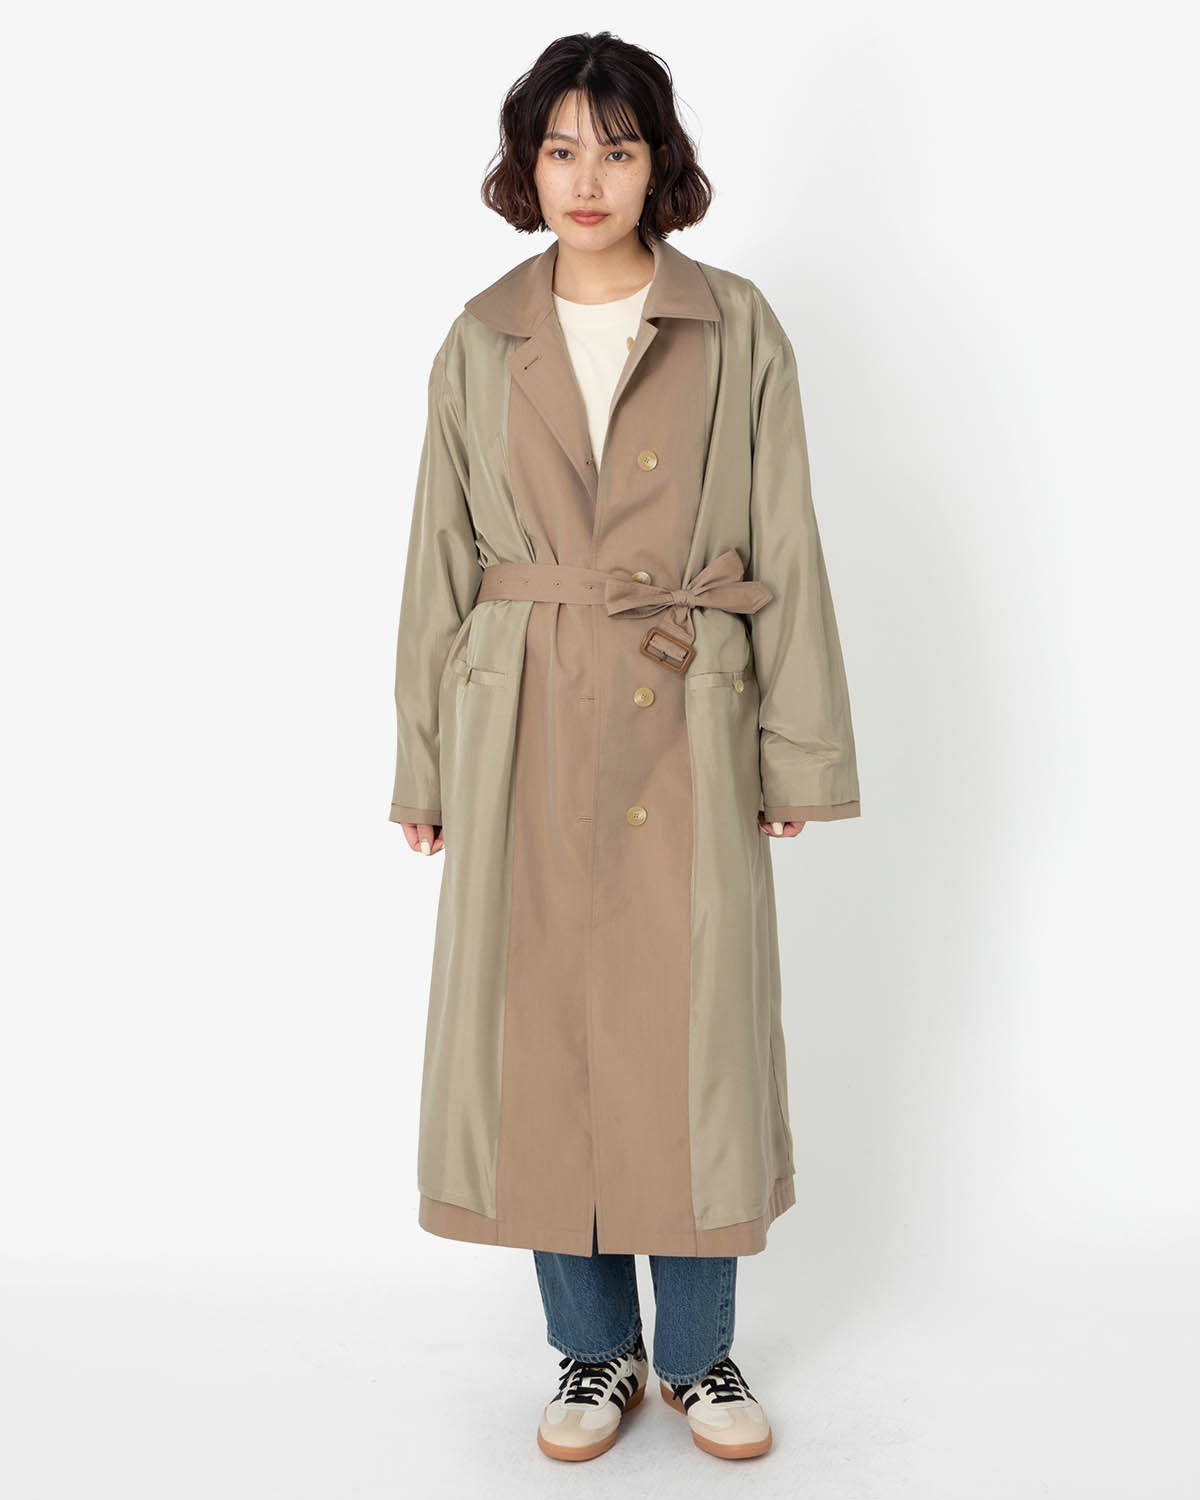 FINX POLYESTER WEATHER CHAMBRAY SOUTIEN COLLAR COAT (WOMEN'S)